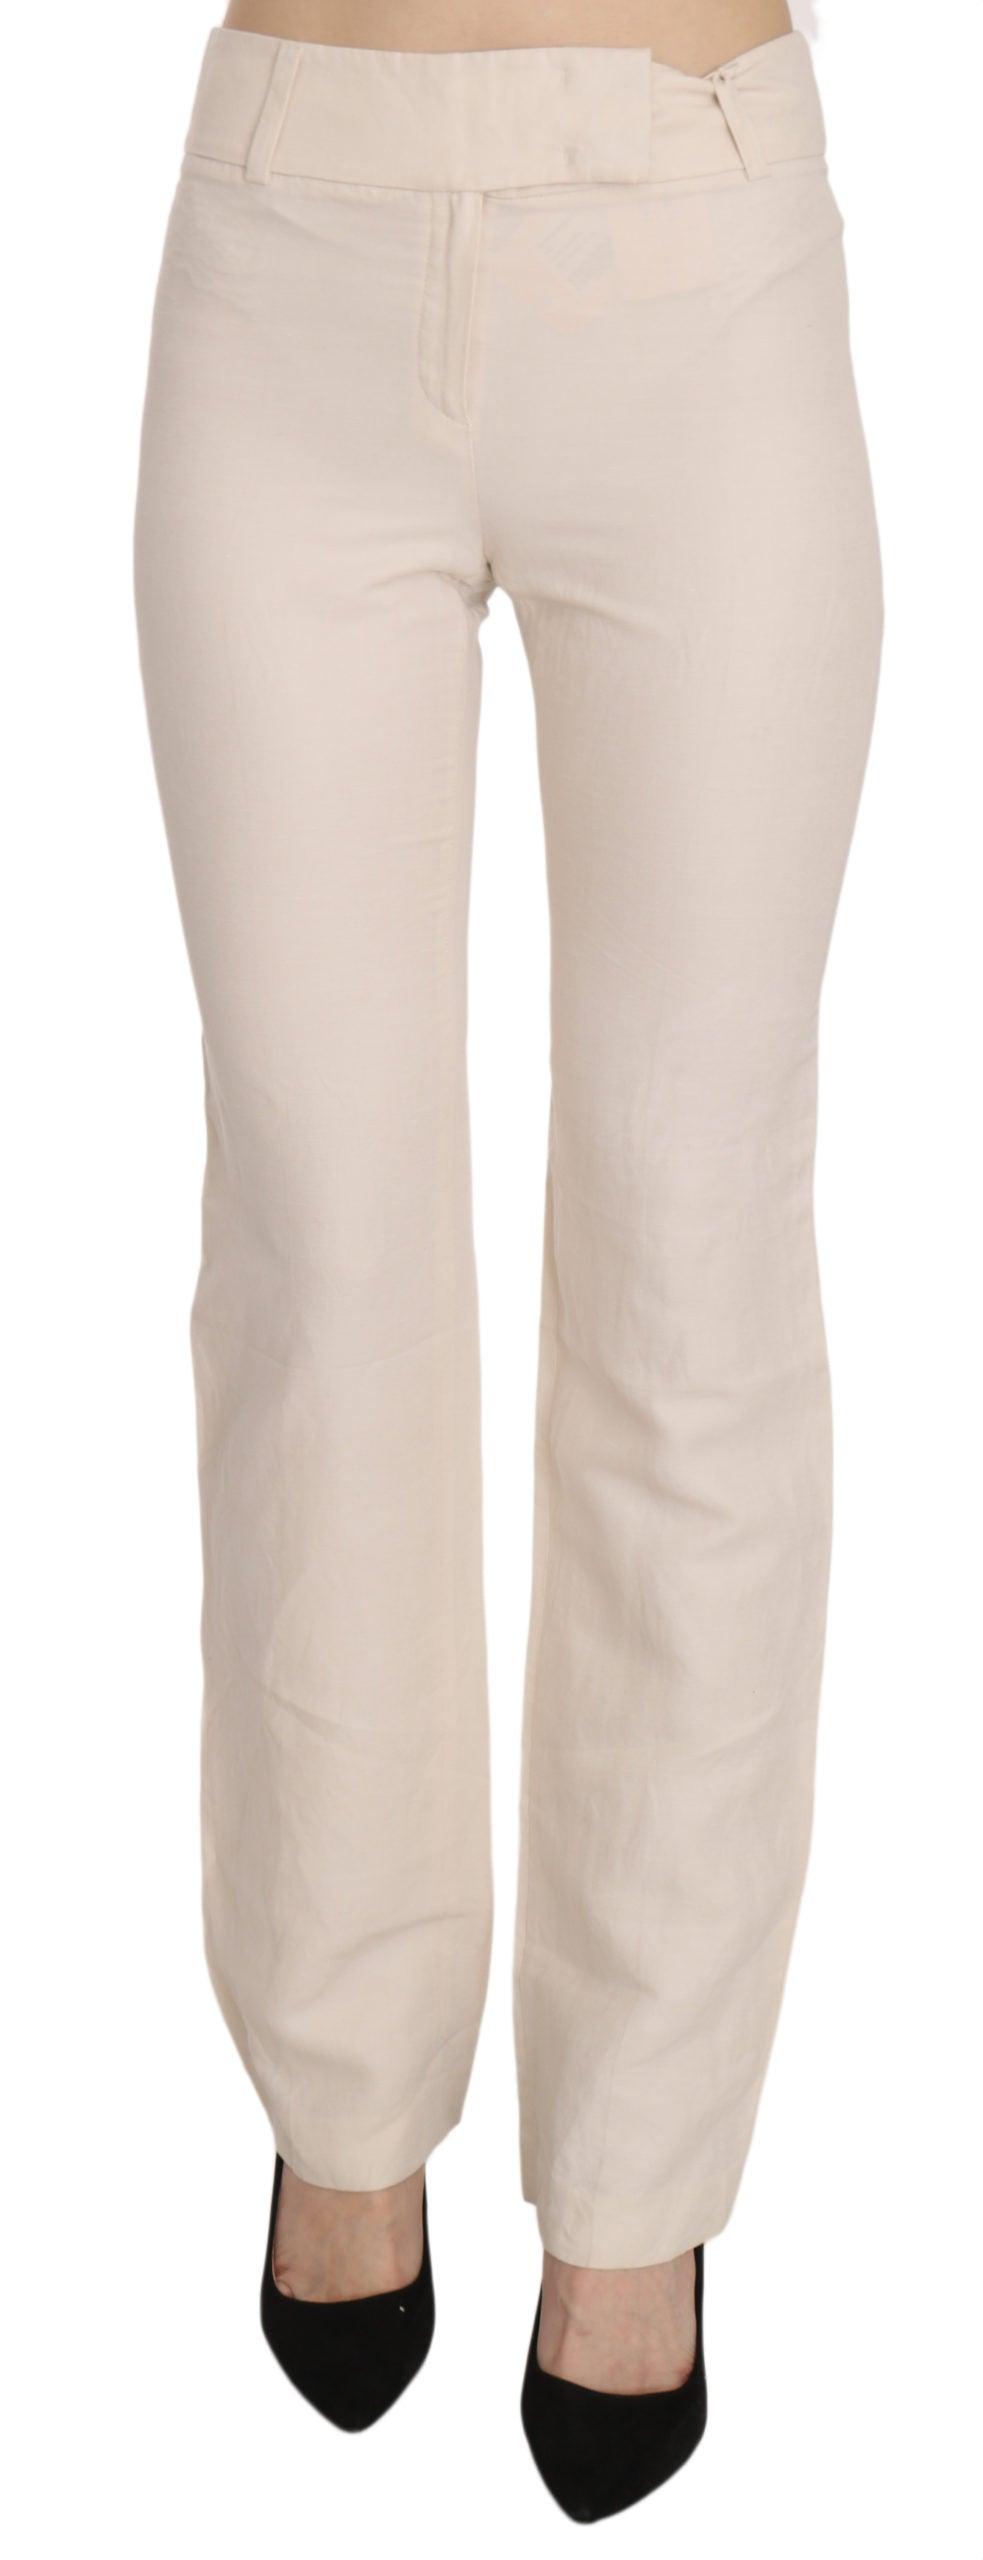 White High Waist Silk Blend Flared Dress Trousers Pants designed by LAUREL available from Moon Behind The Hill's Women's Clothing range